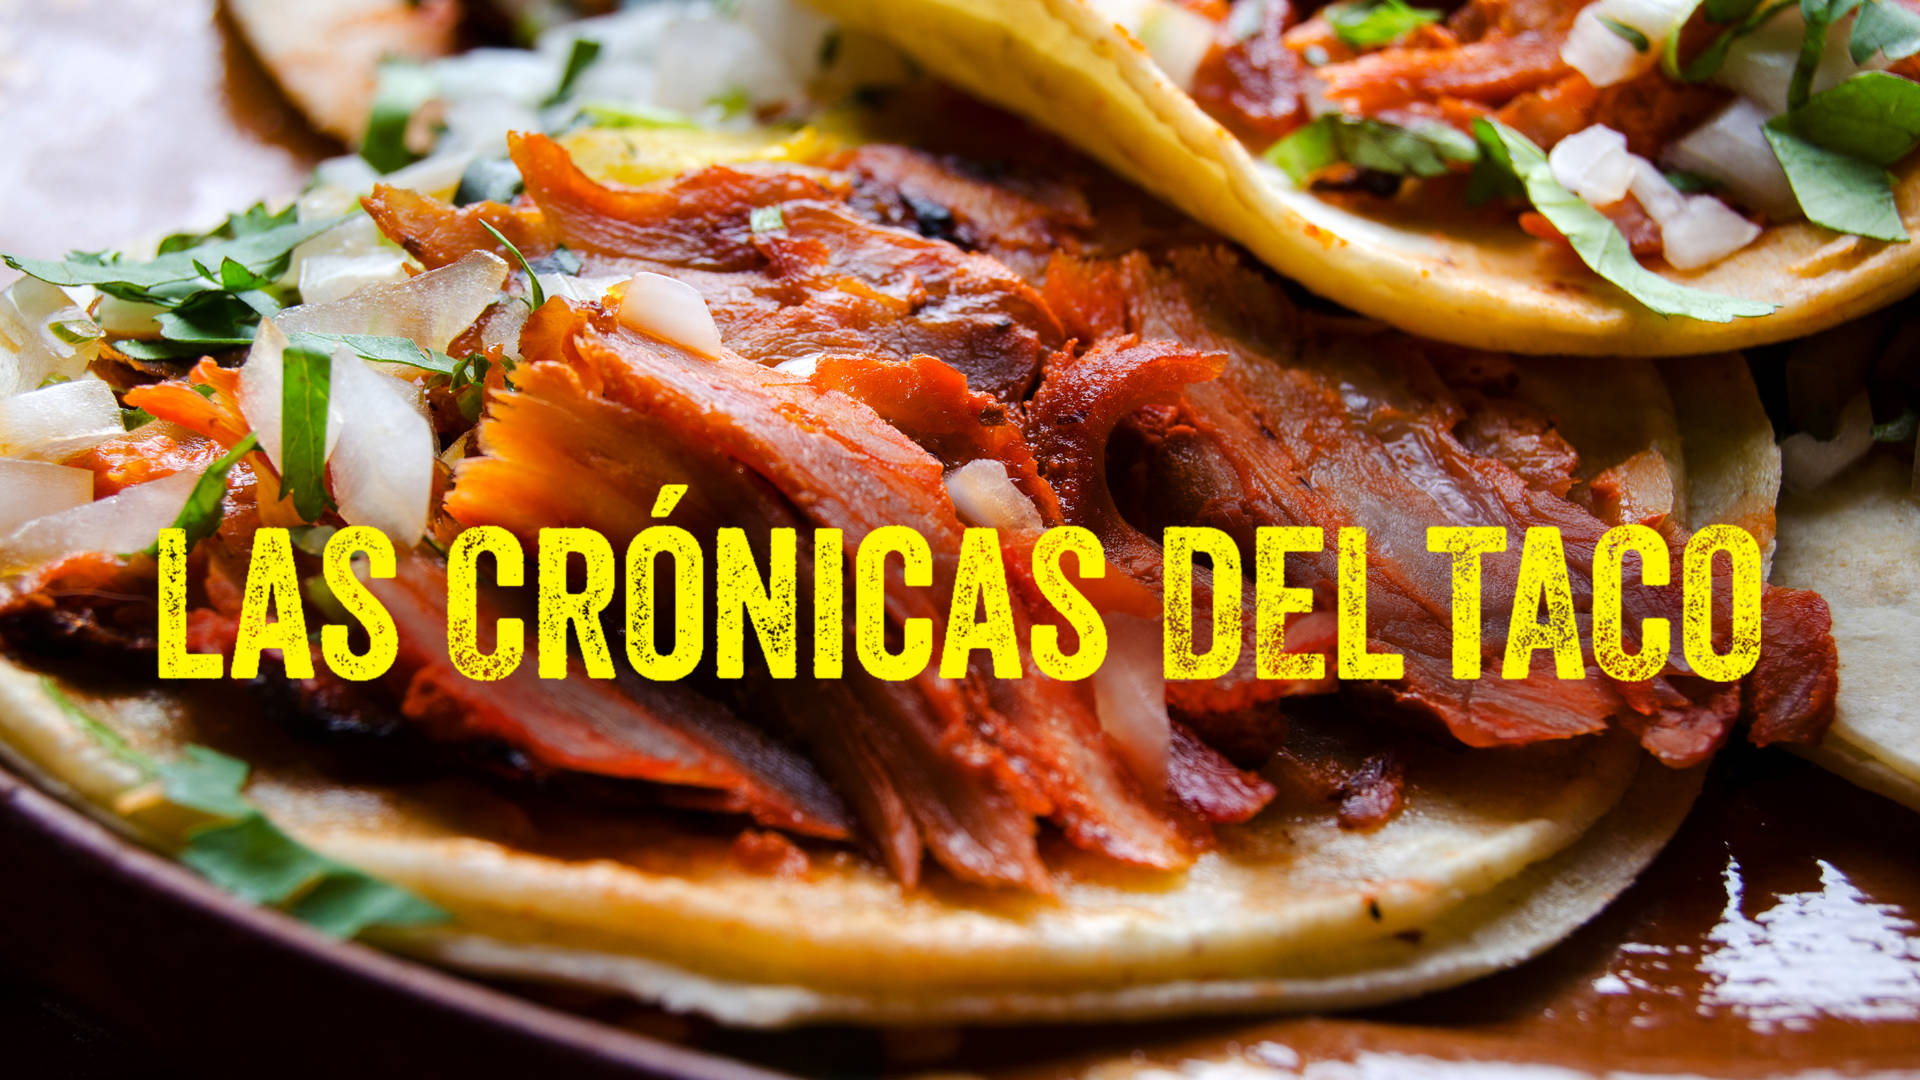 Netflix's documentary series 'Las Crónicas del Taco' was released in July 2019.